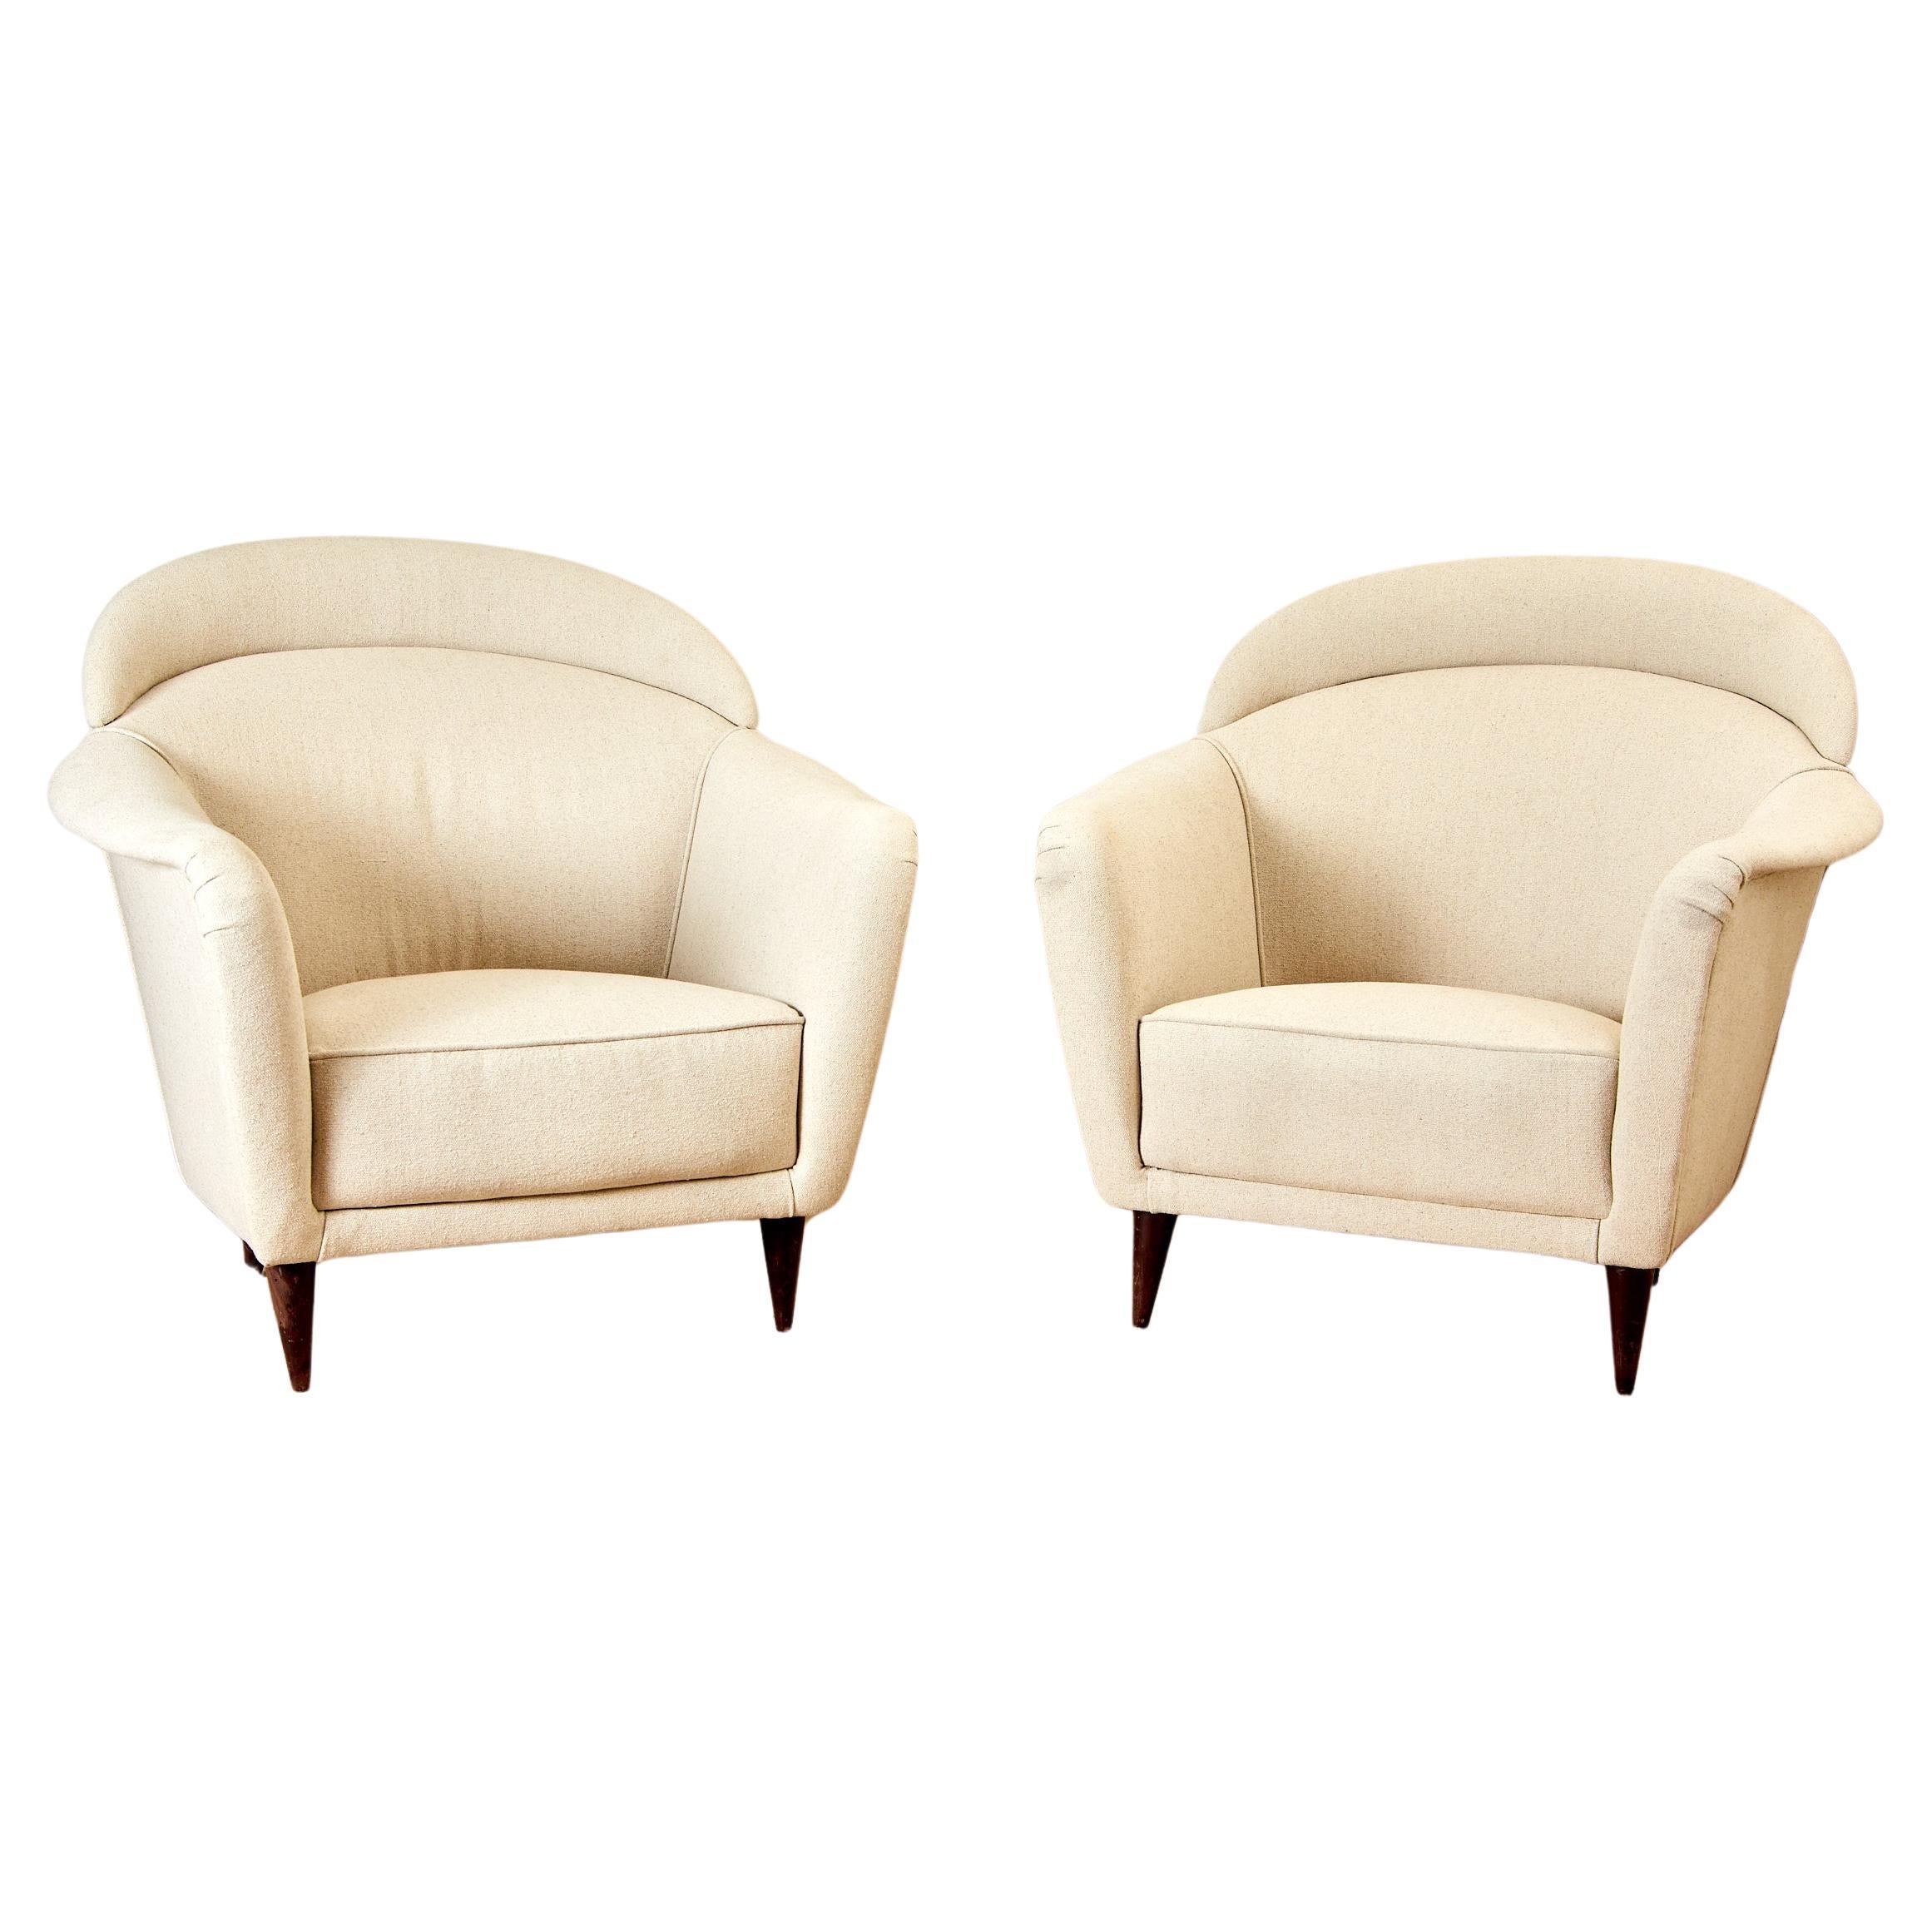 Pair of armchairs, wood and cotton, circa 1970, Italy.